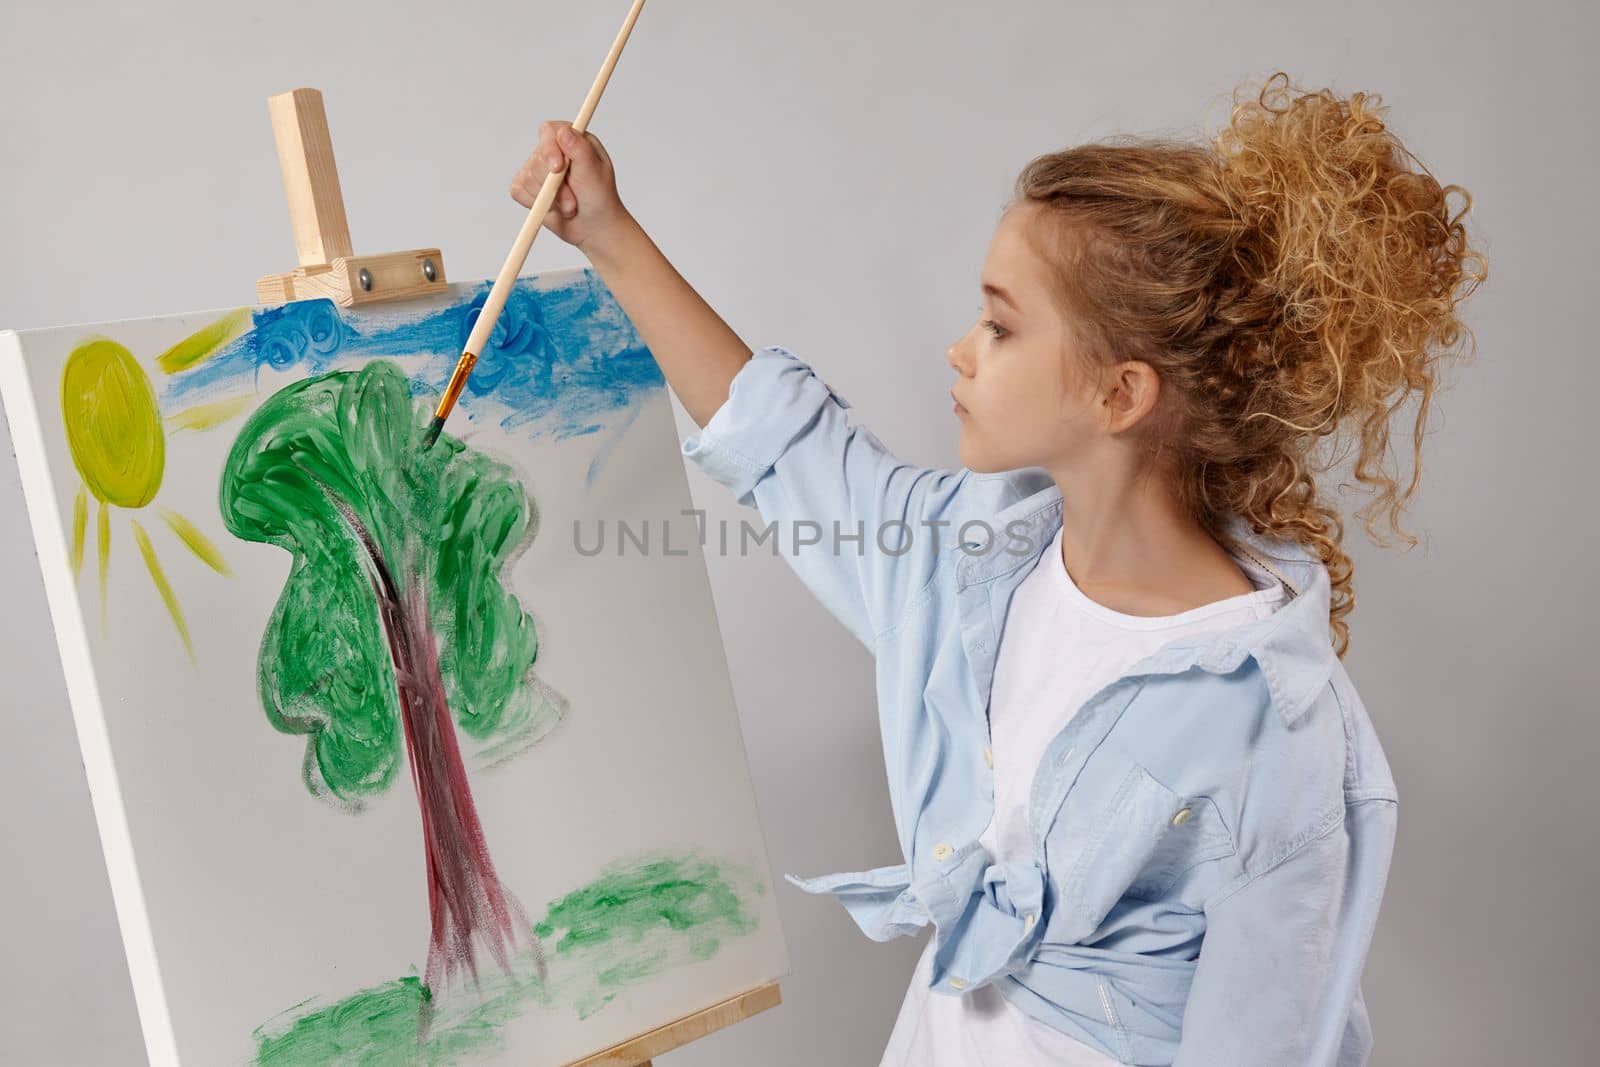 Charming school girl whith a curly blond hair, wearing in a blue shirt and white t-shirt is painting with a watercolor brush on an easel, standing on a gray background.